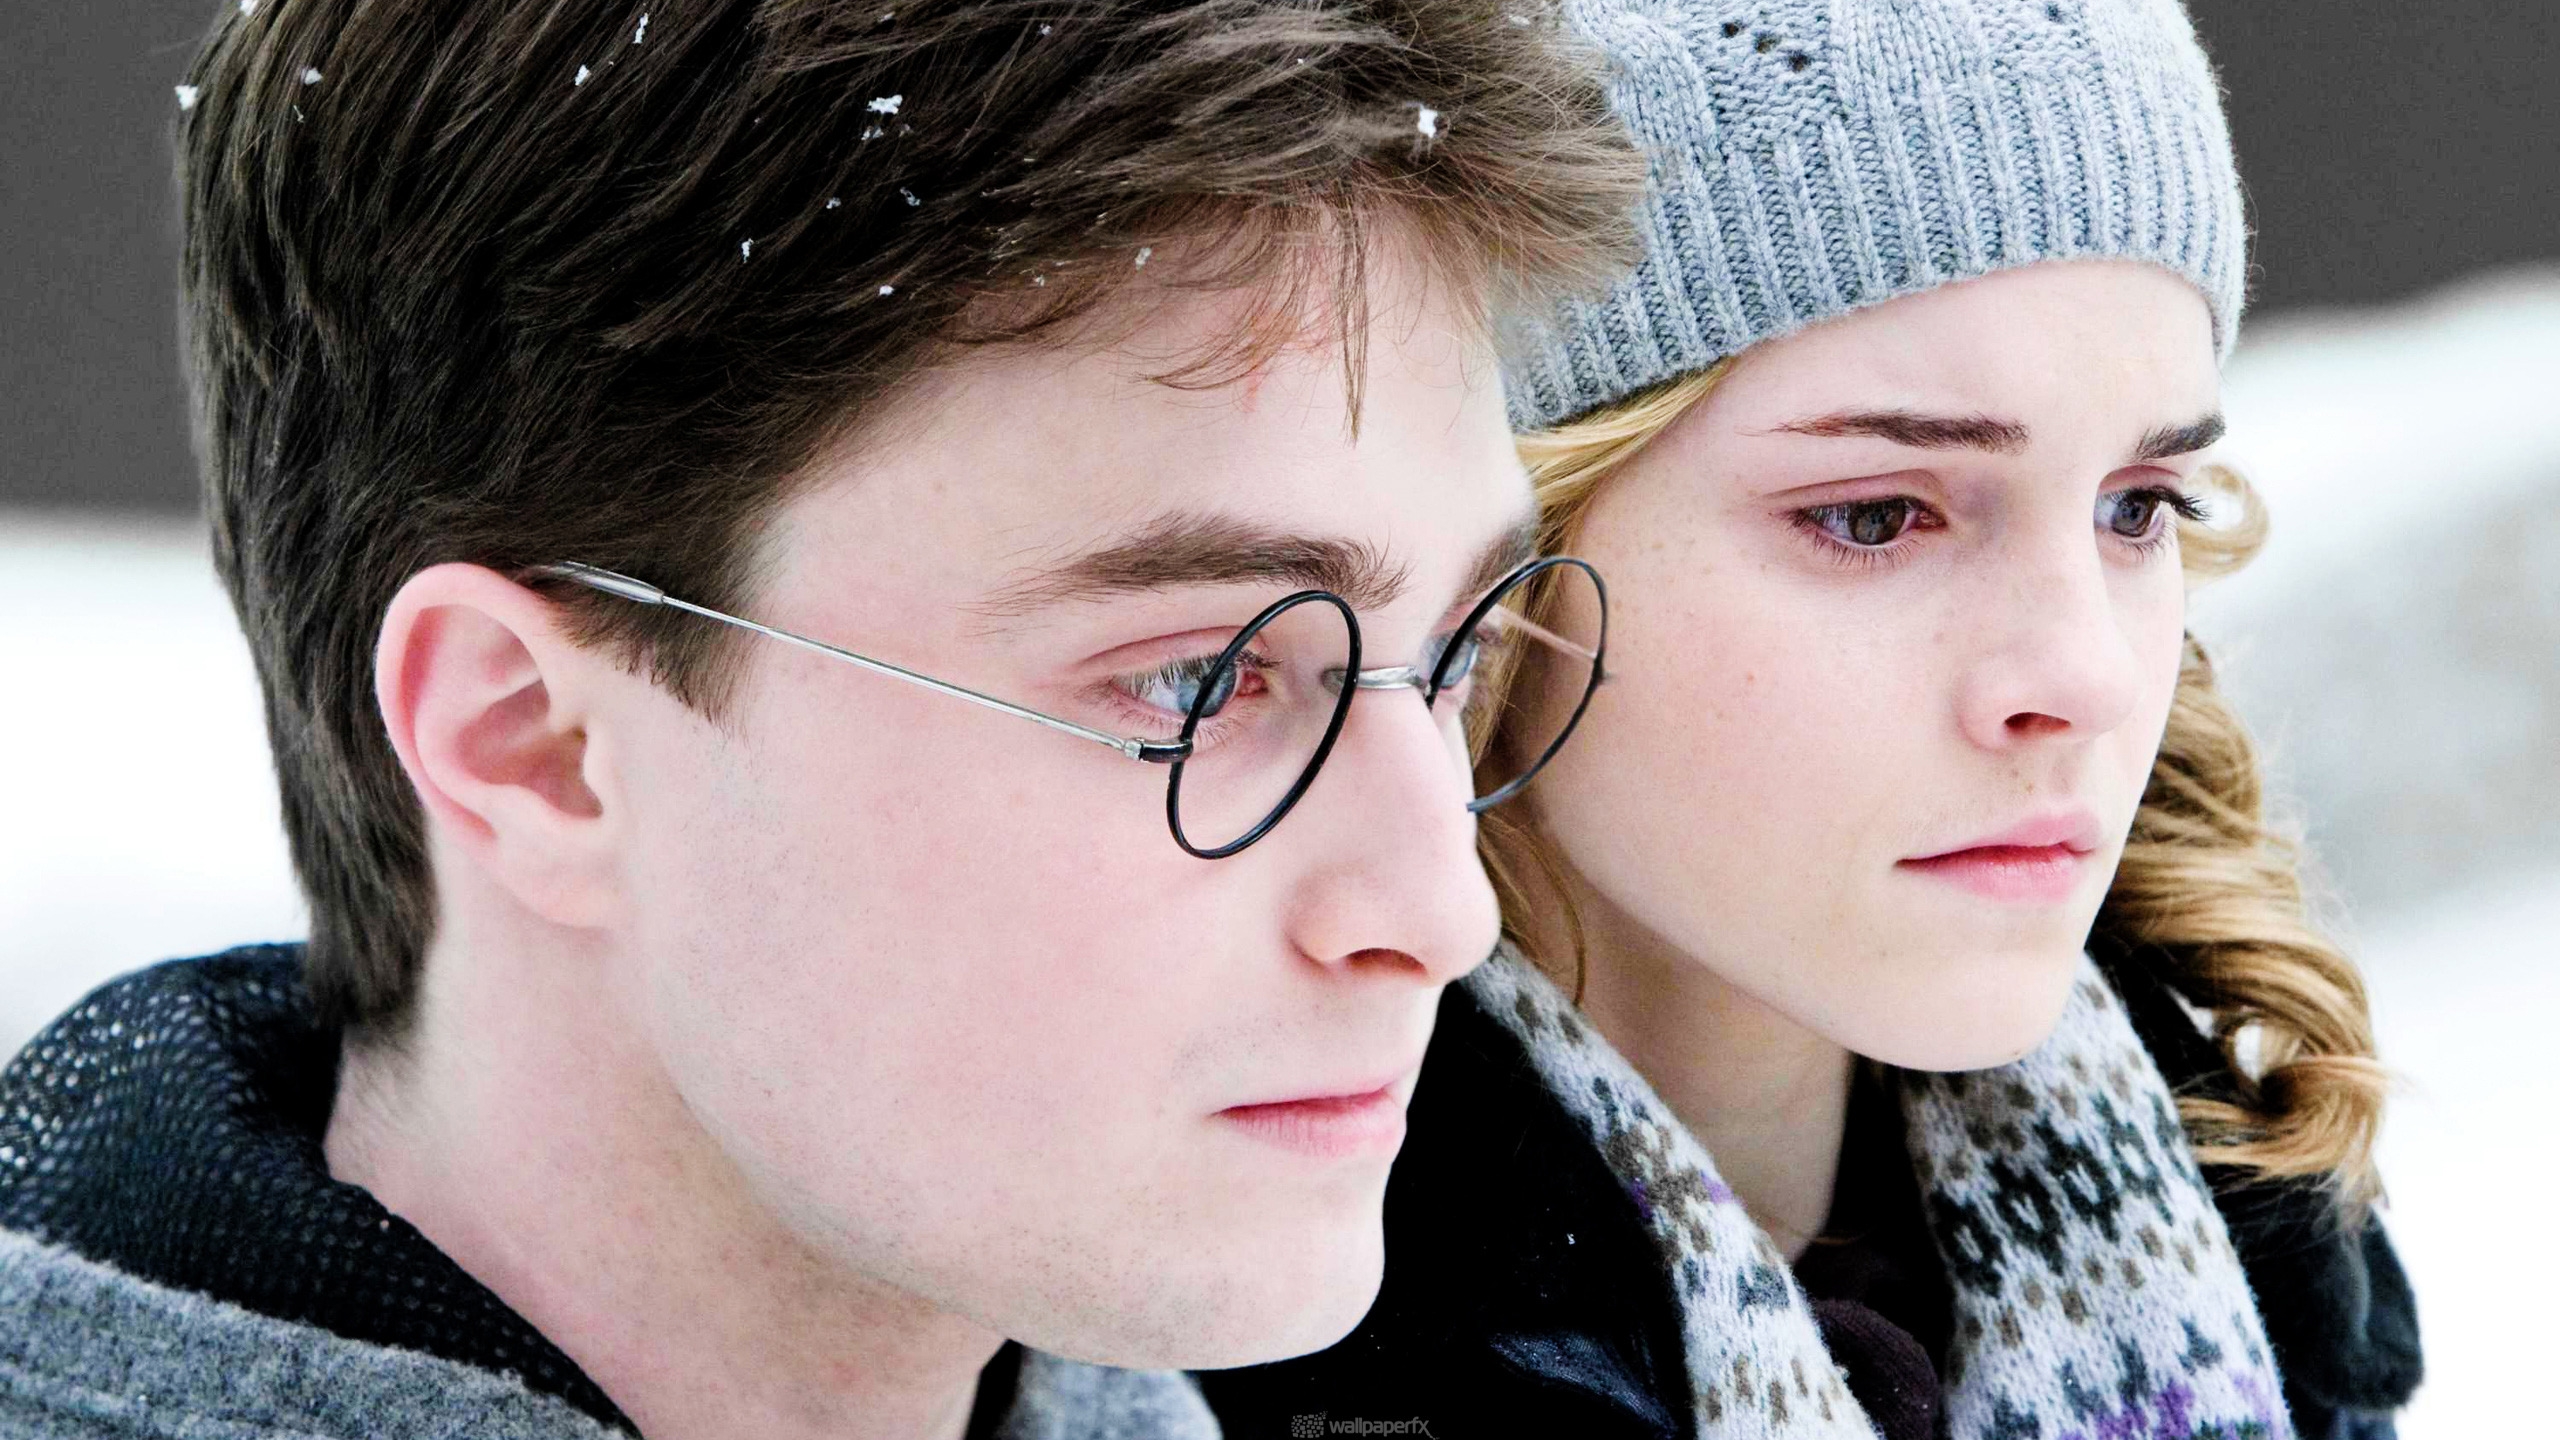 Harry and Hermione for 2560x1440 HDTV resolution